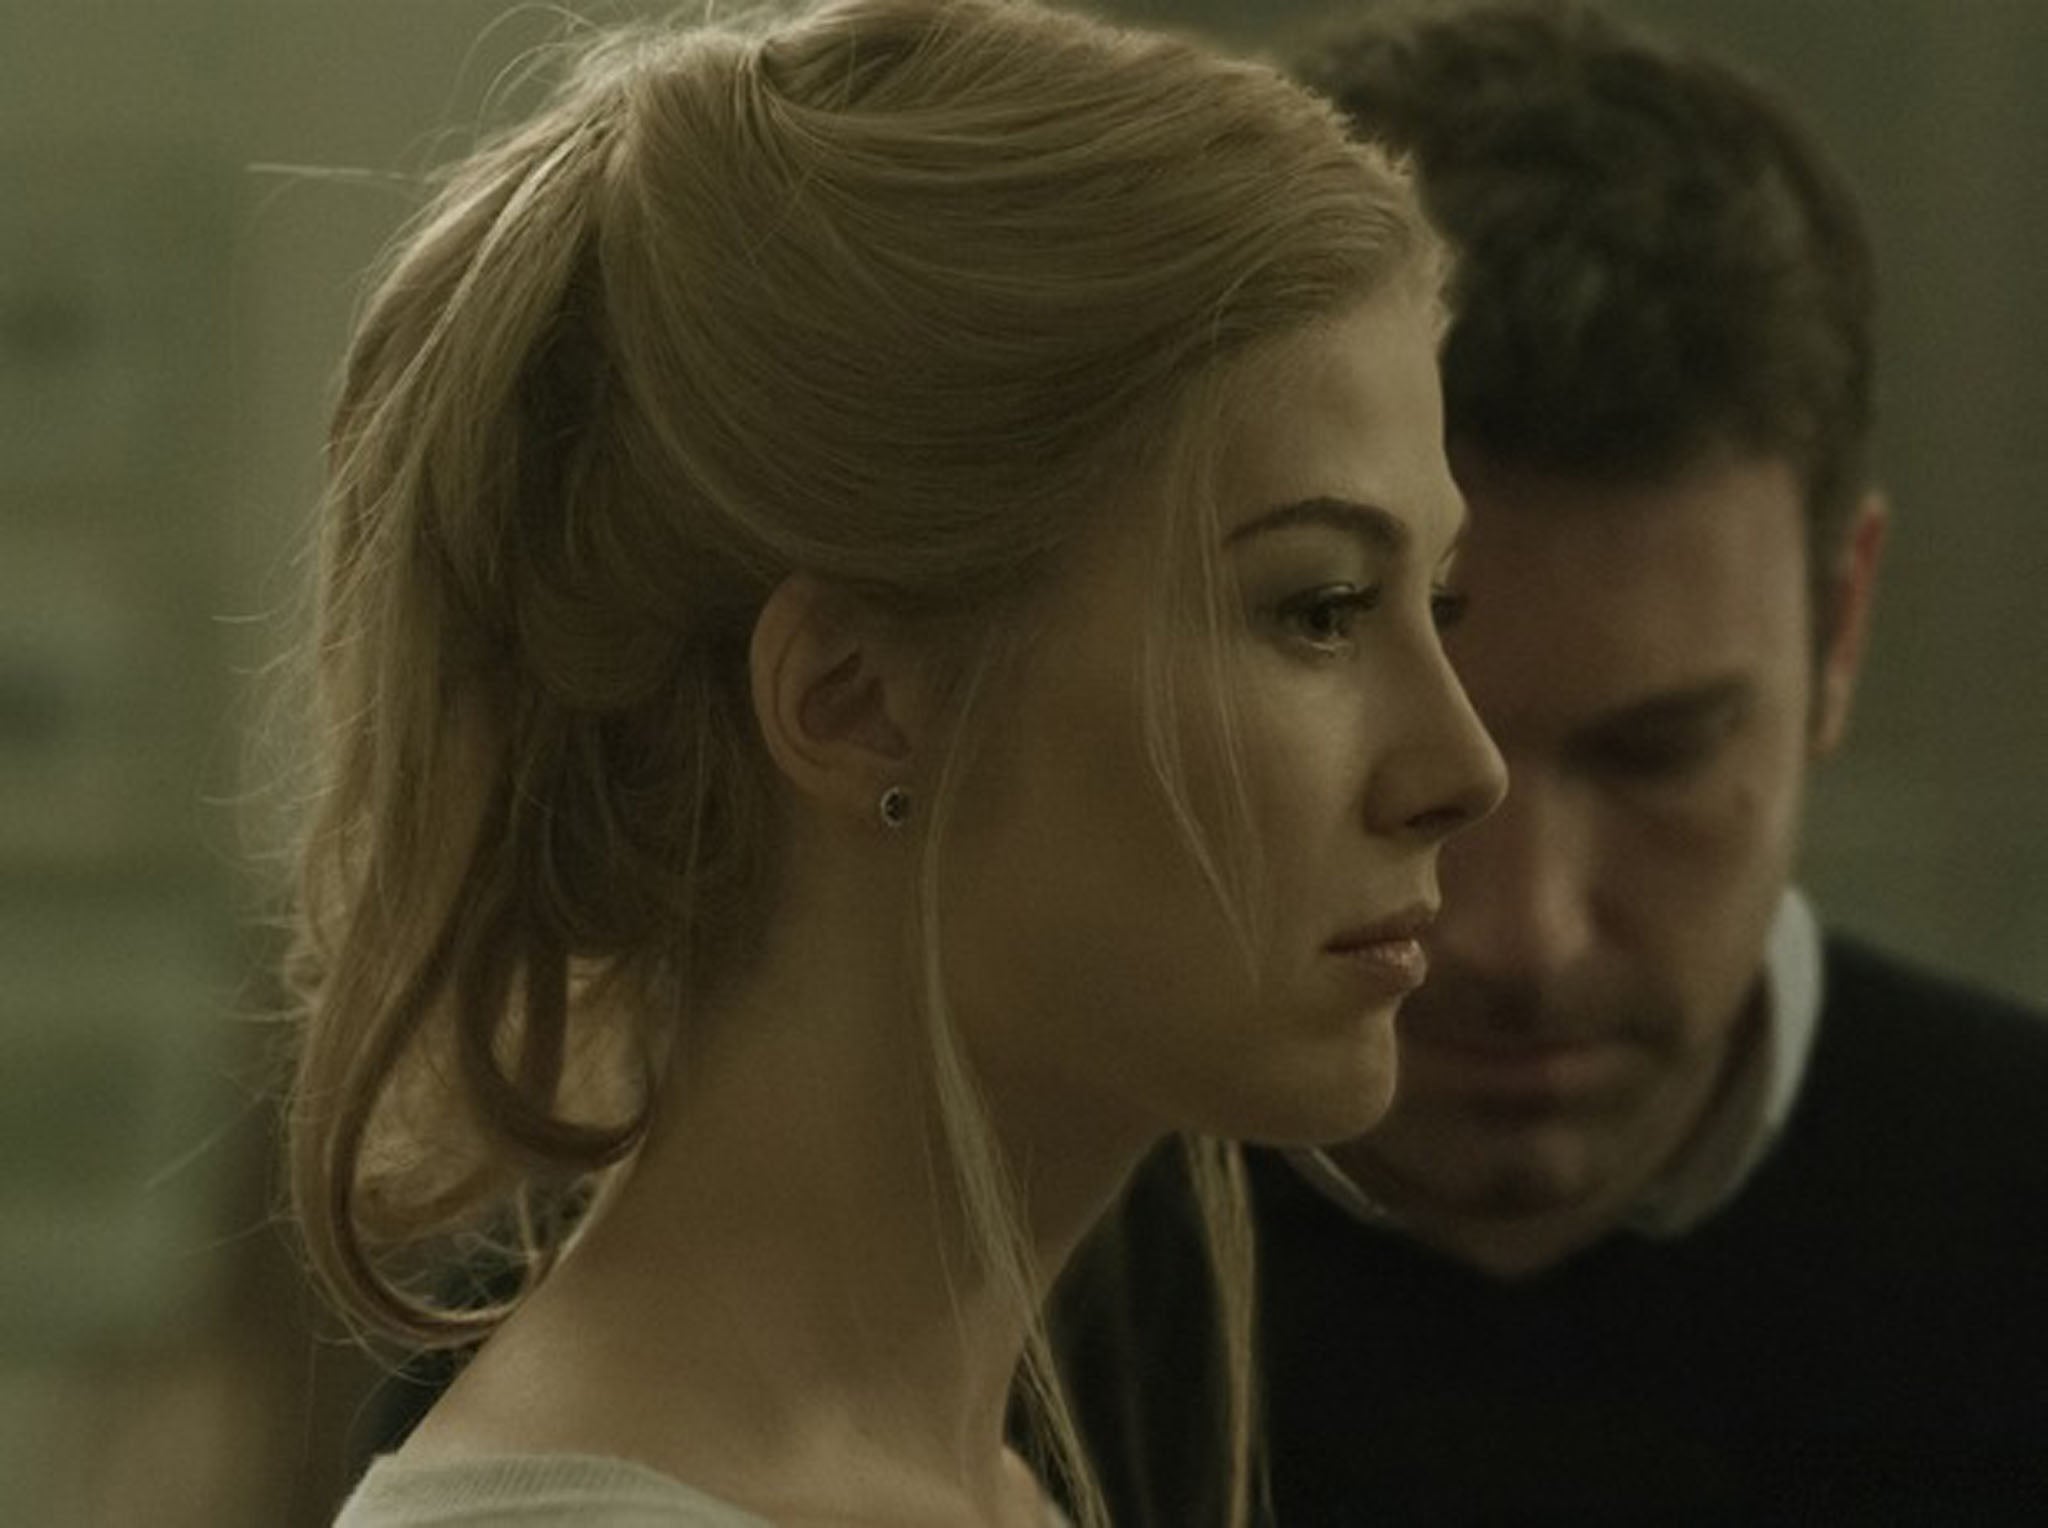 Rosamund Pike plays over-achieving Ivy League graduate Amy Dunne